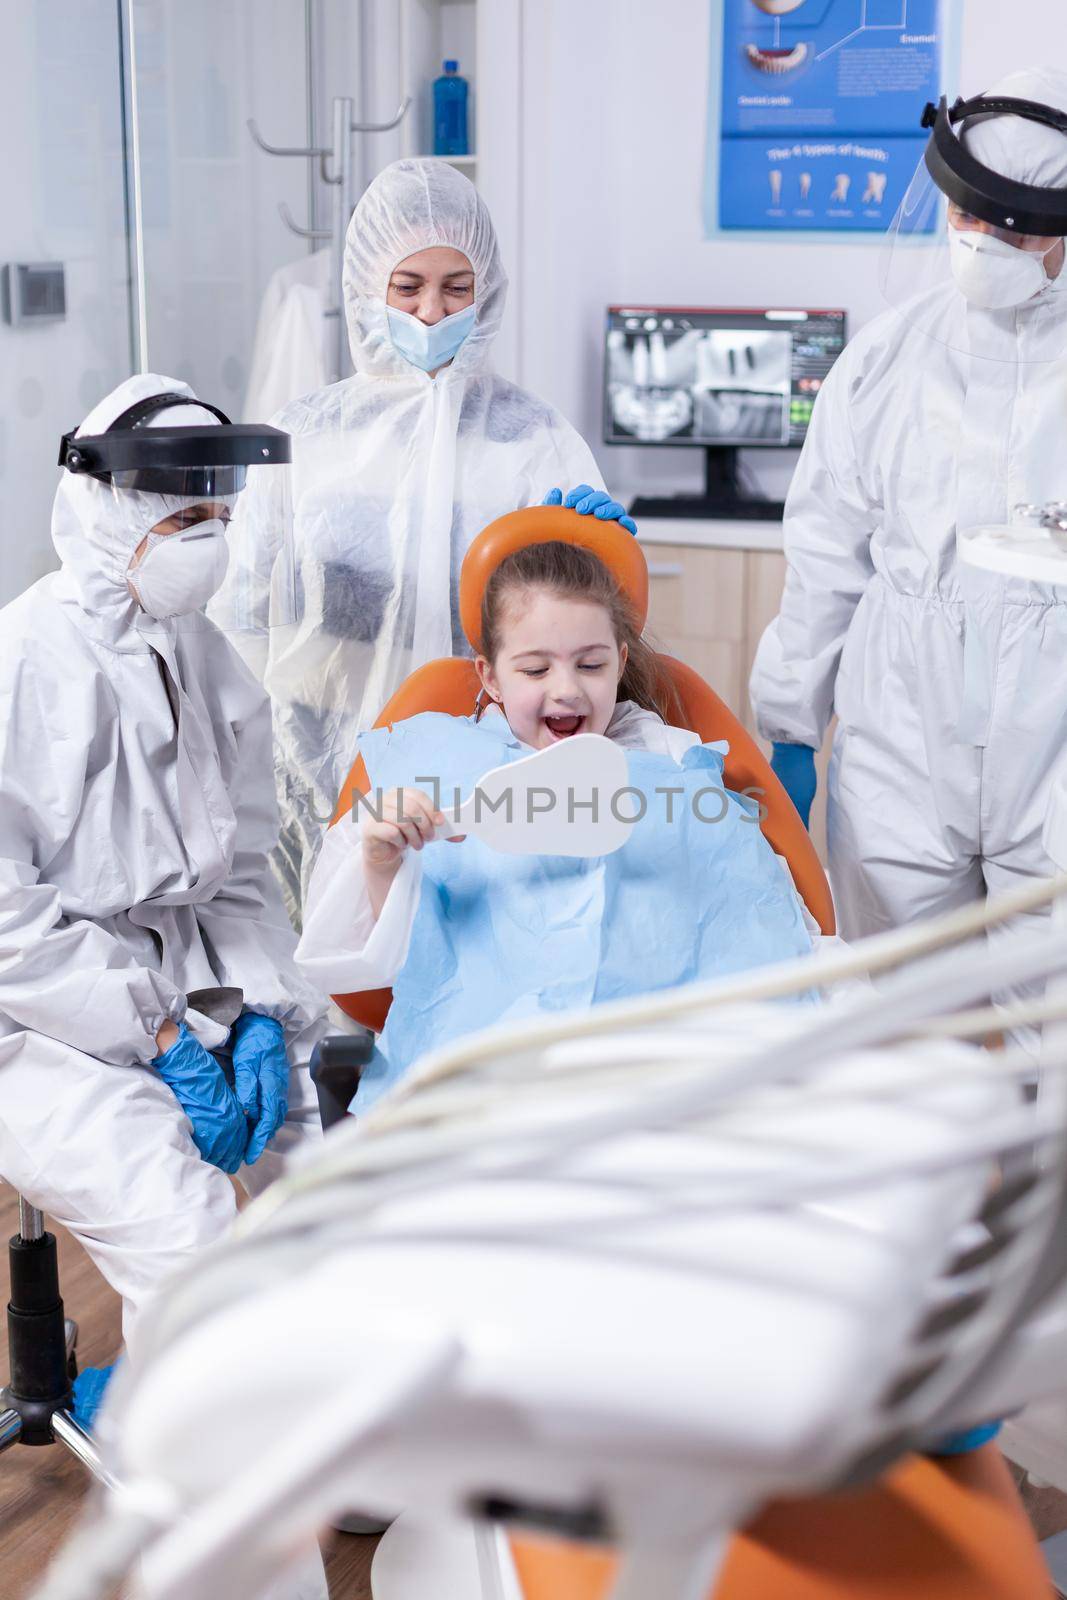 Cheerful little girl looks in mirror after dentral treatment dressed in ppe suit. Child wearing ppe suit during teeth intervention at dental hospital.